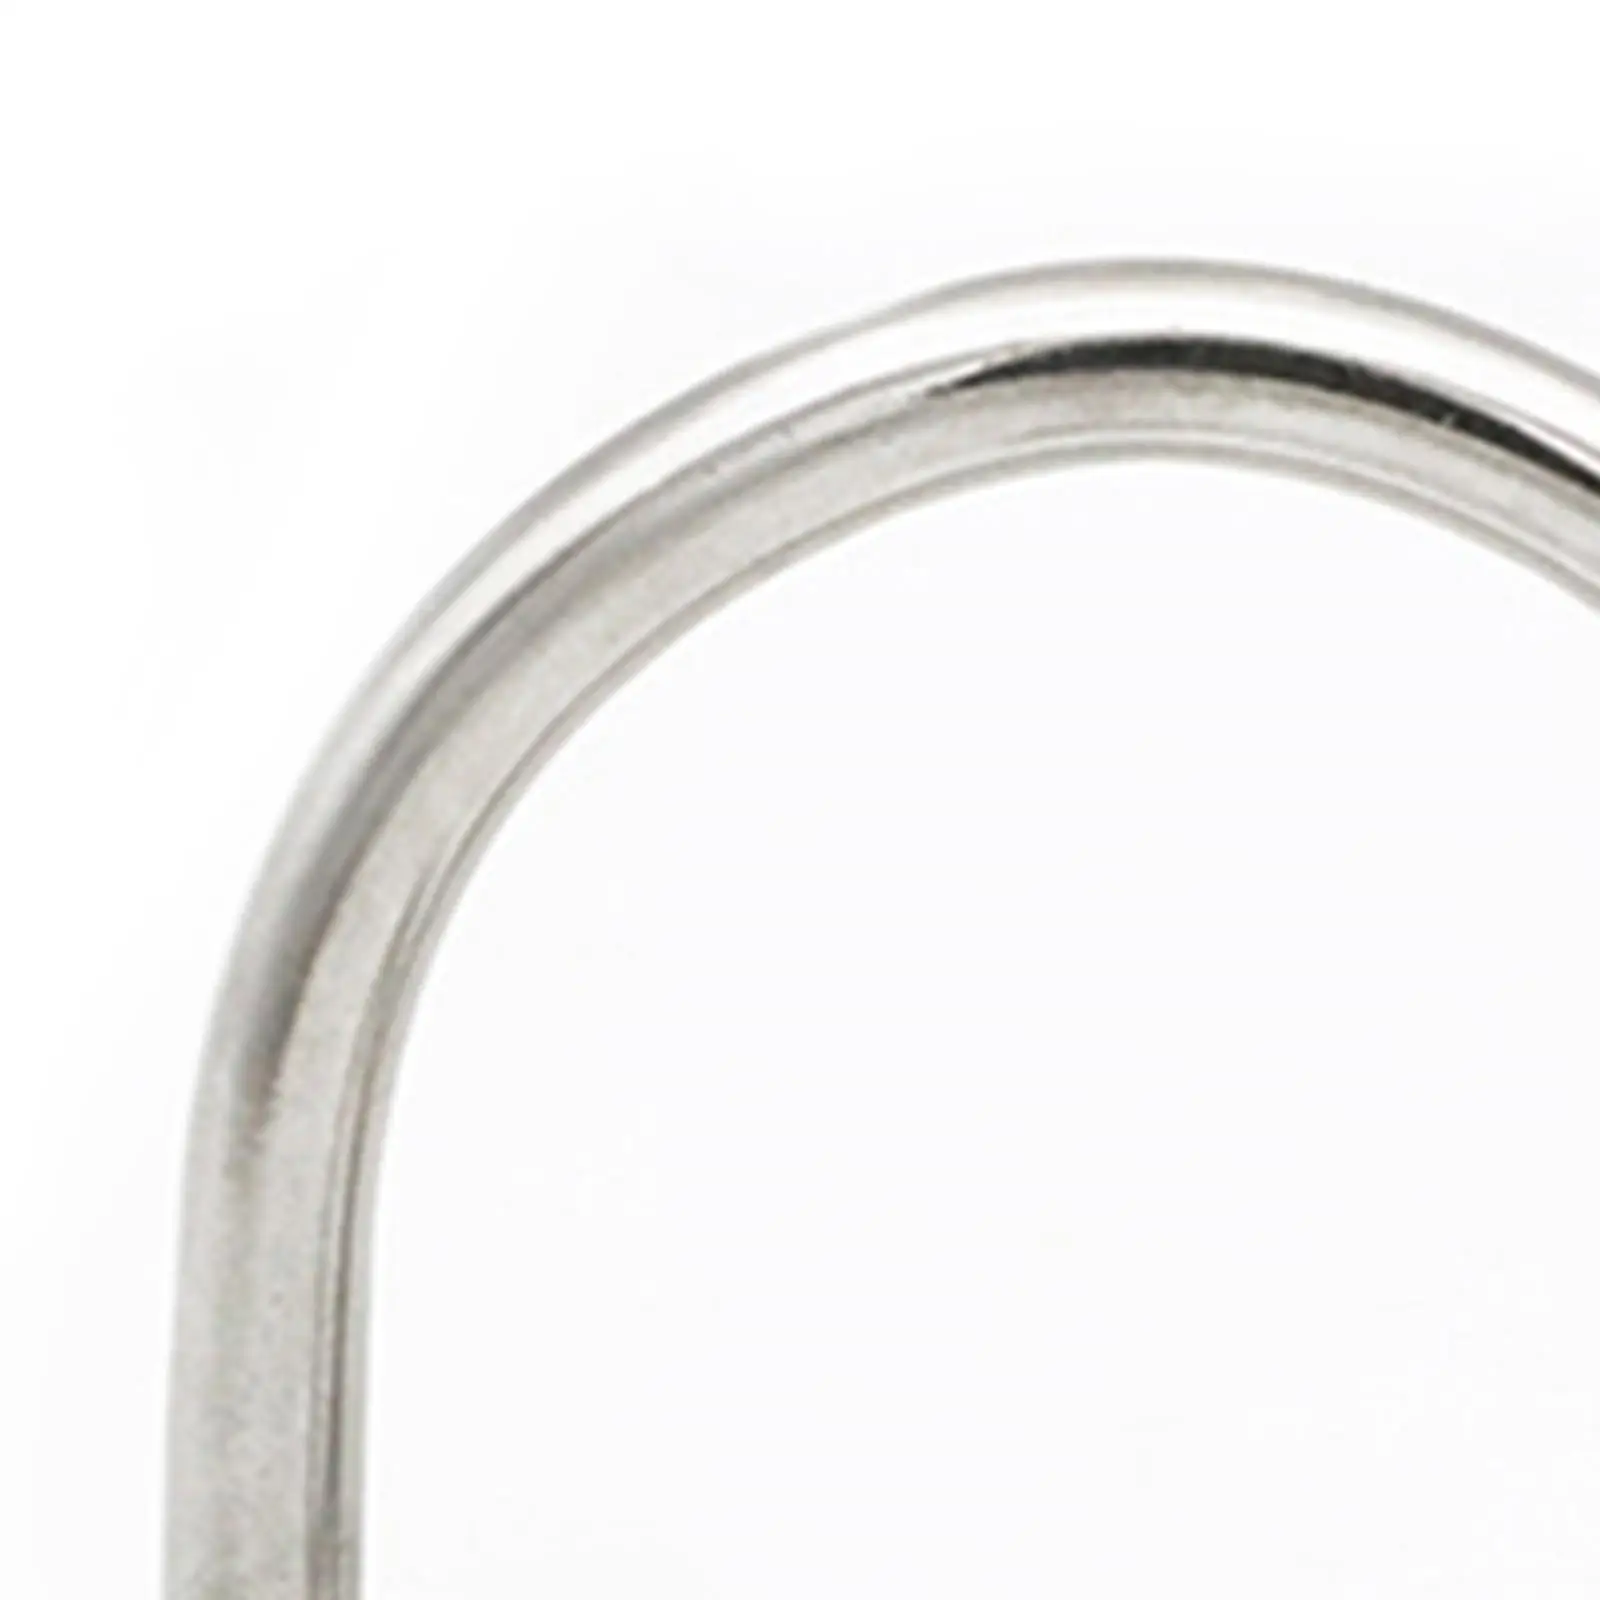 Horseshoe Shape Buckles Hardware Accessories Lightweight Stainless Steel D Rings